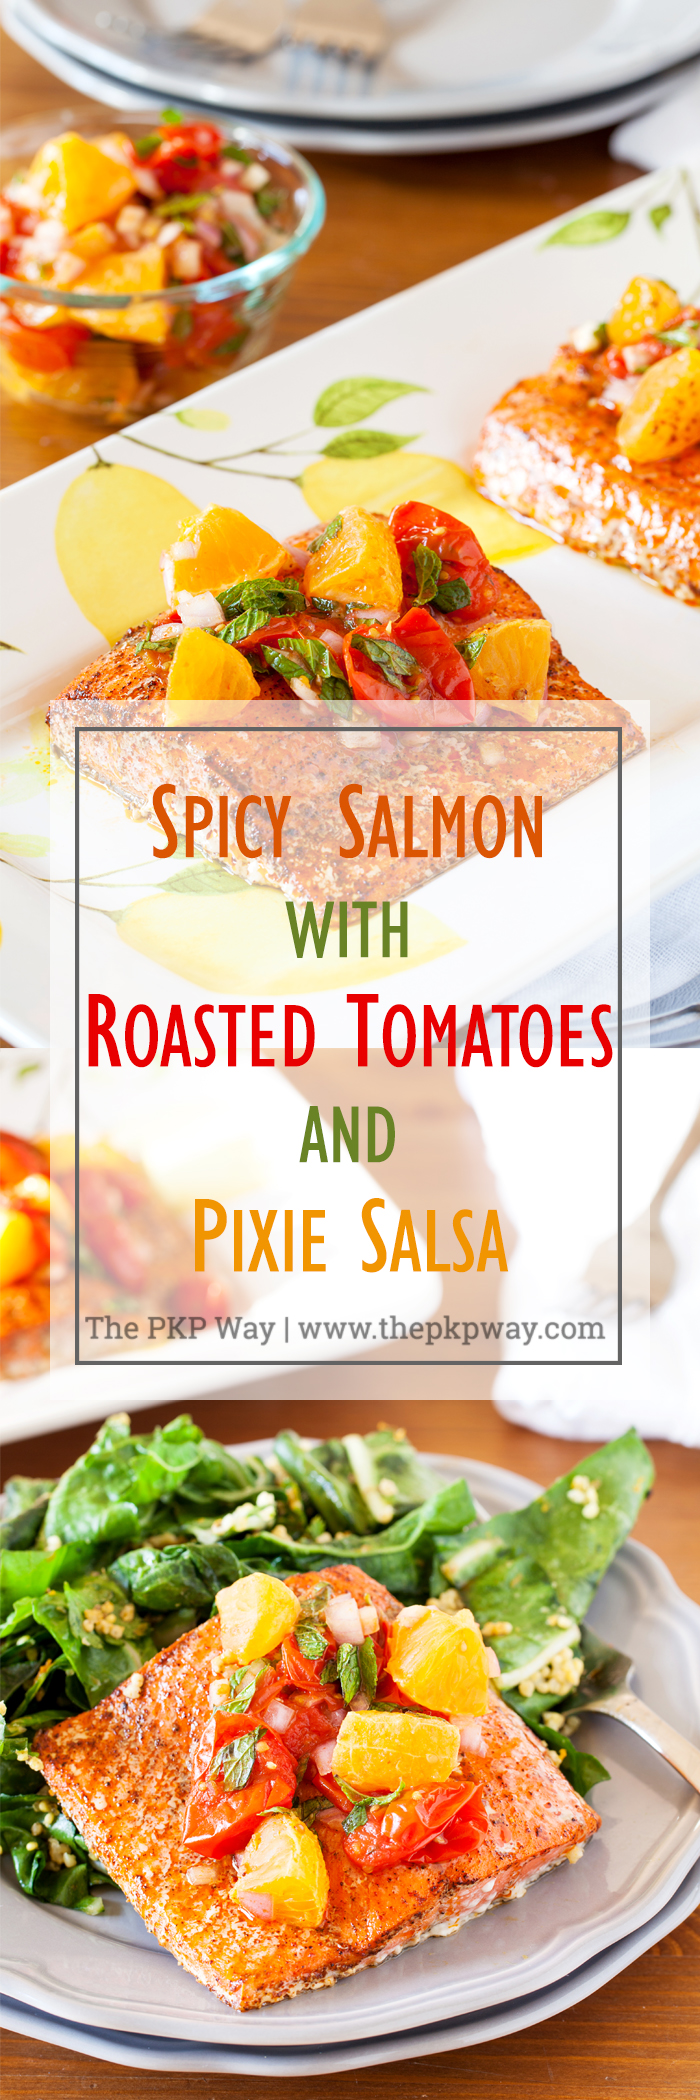 Roasted tomatoes and Ojai Pixies create a bright, fresh, sweet, and sour salsa perfect for dressing this spicy salmon for the perfect spring time dish. 